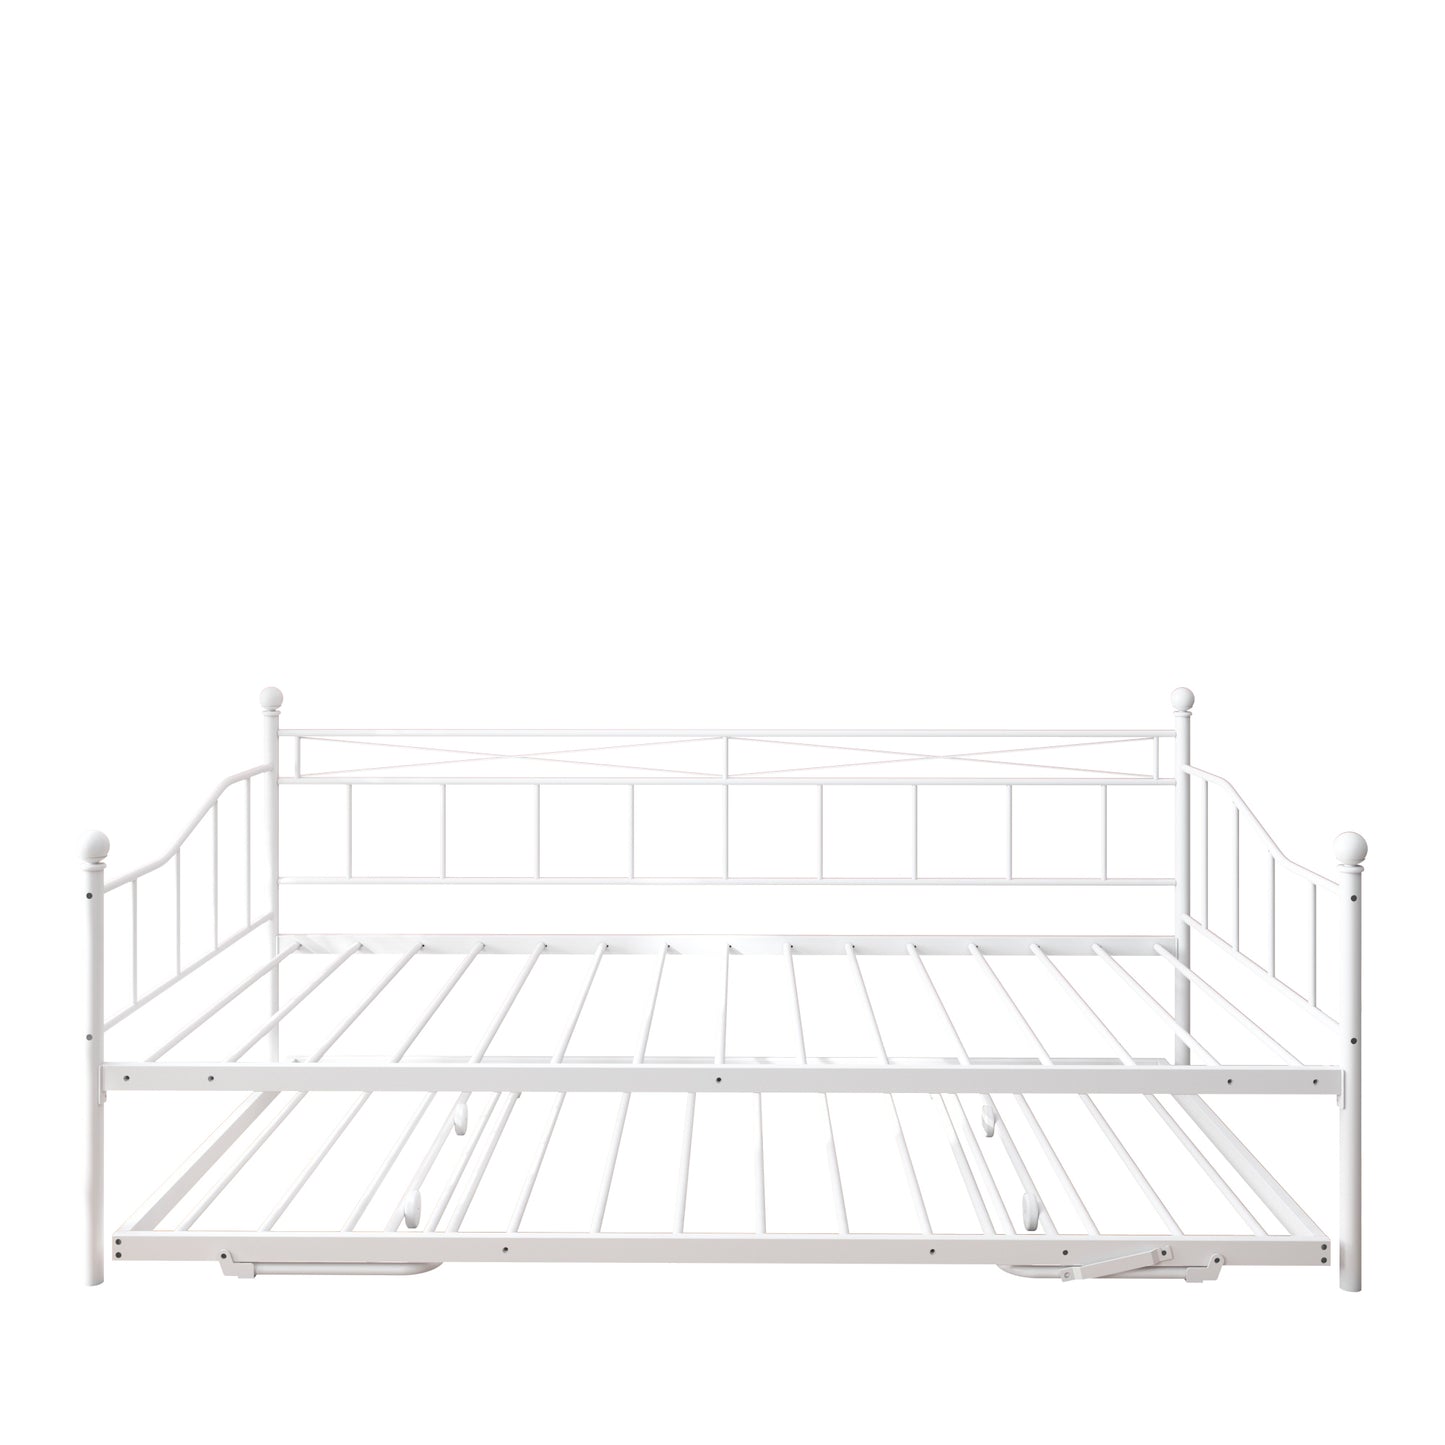 SYNGAR Metal Daybed with Trundle, Modern Home Twin Daybed with Pop Up Trundle for Living Room/Bedroom, Twin Size Sofa Bed W/ Steel Slats Support, Platform Bed Frame No Box Spring Needed, White, D6612